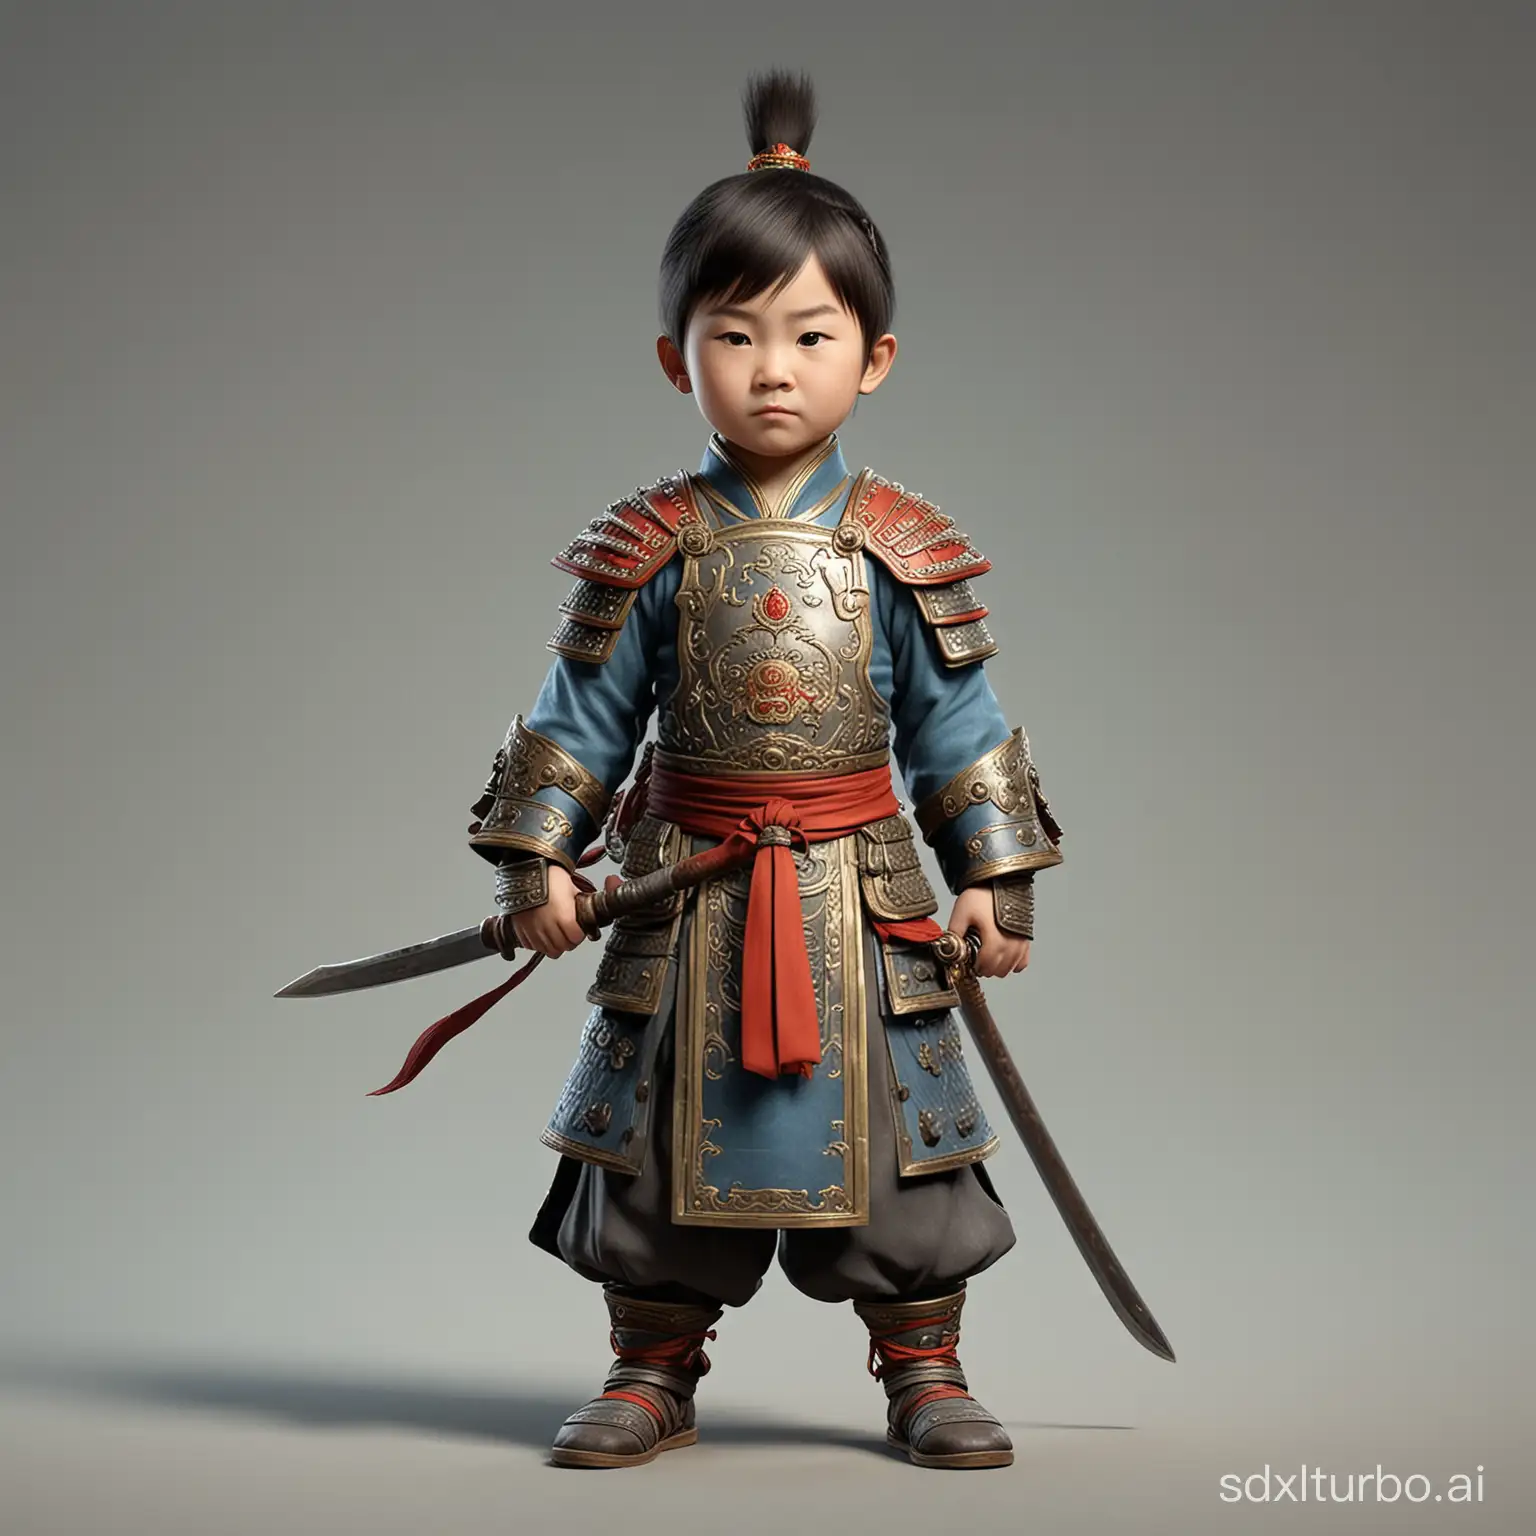 Little child masterpiece of boy Chinese Warrior, game character, stands at full height